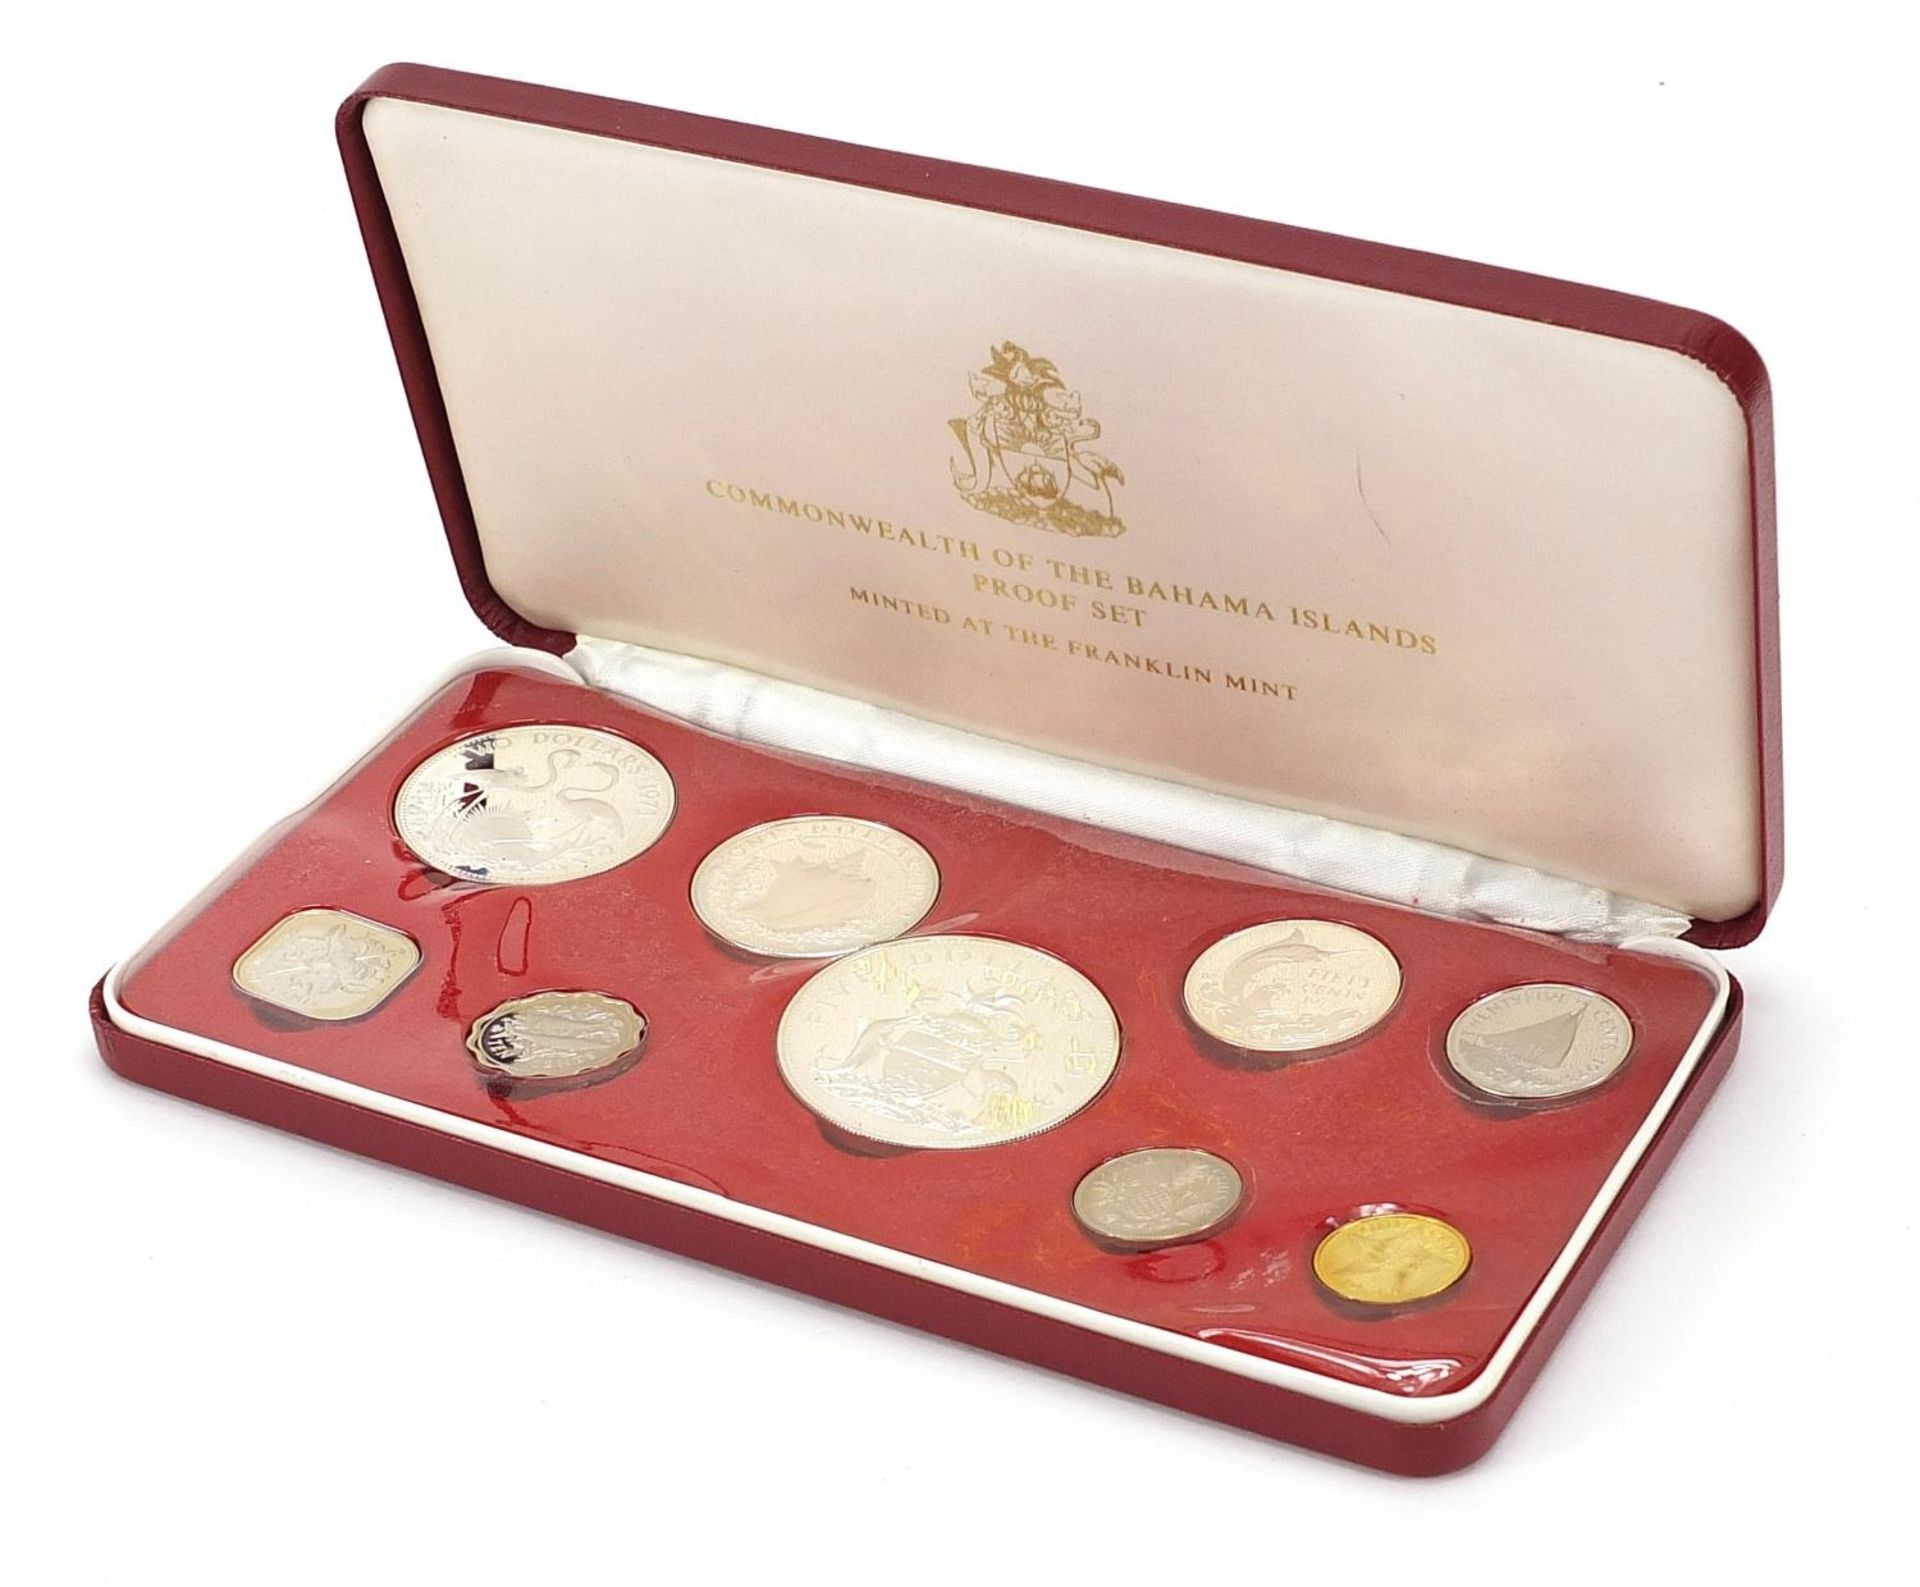 1973 Commonwealth of Bahama Island proof coin set including silver five dollars, two dollars, one